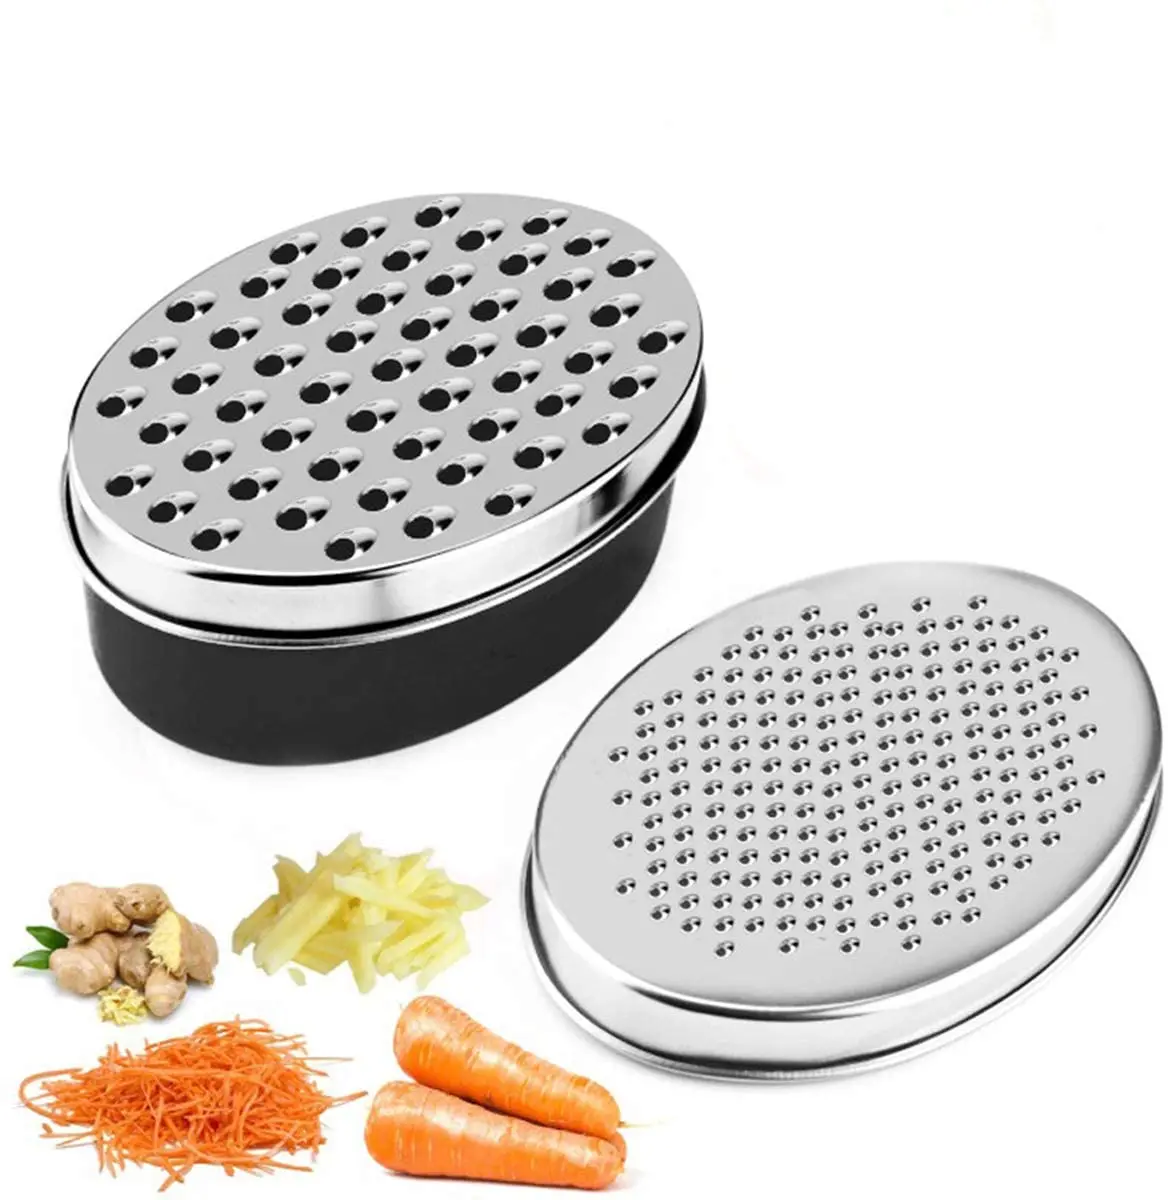 Cheese Grater Slicer Oval Box Vegetables Stainless Steel Fruits w/ Container NEW 